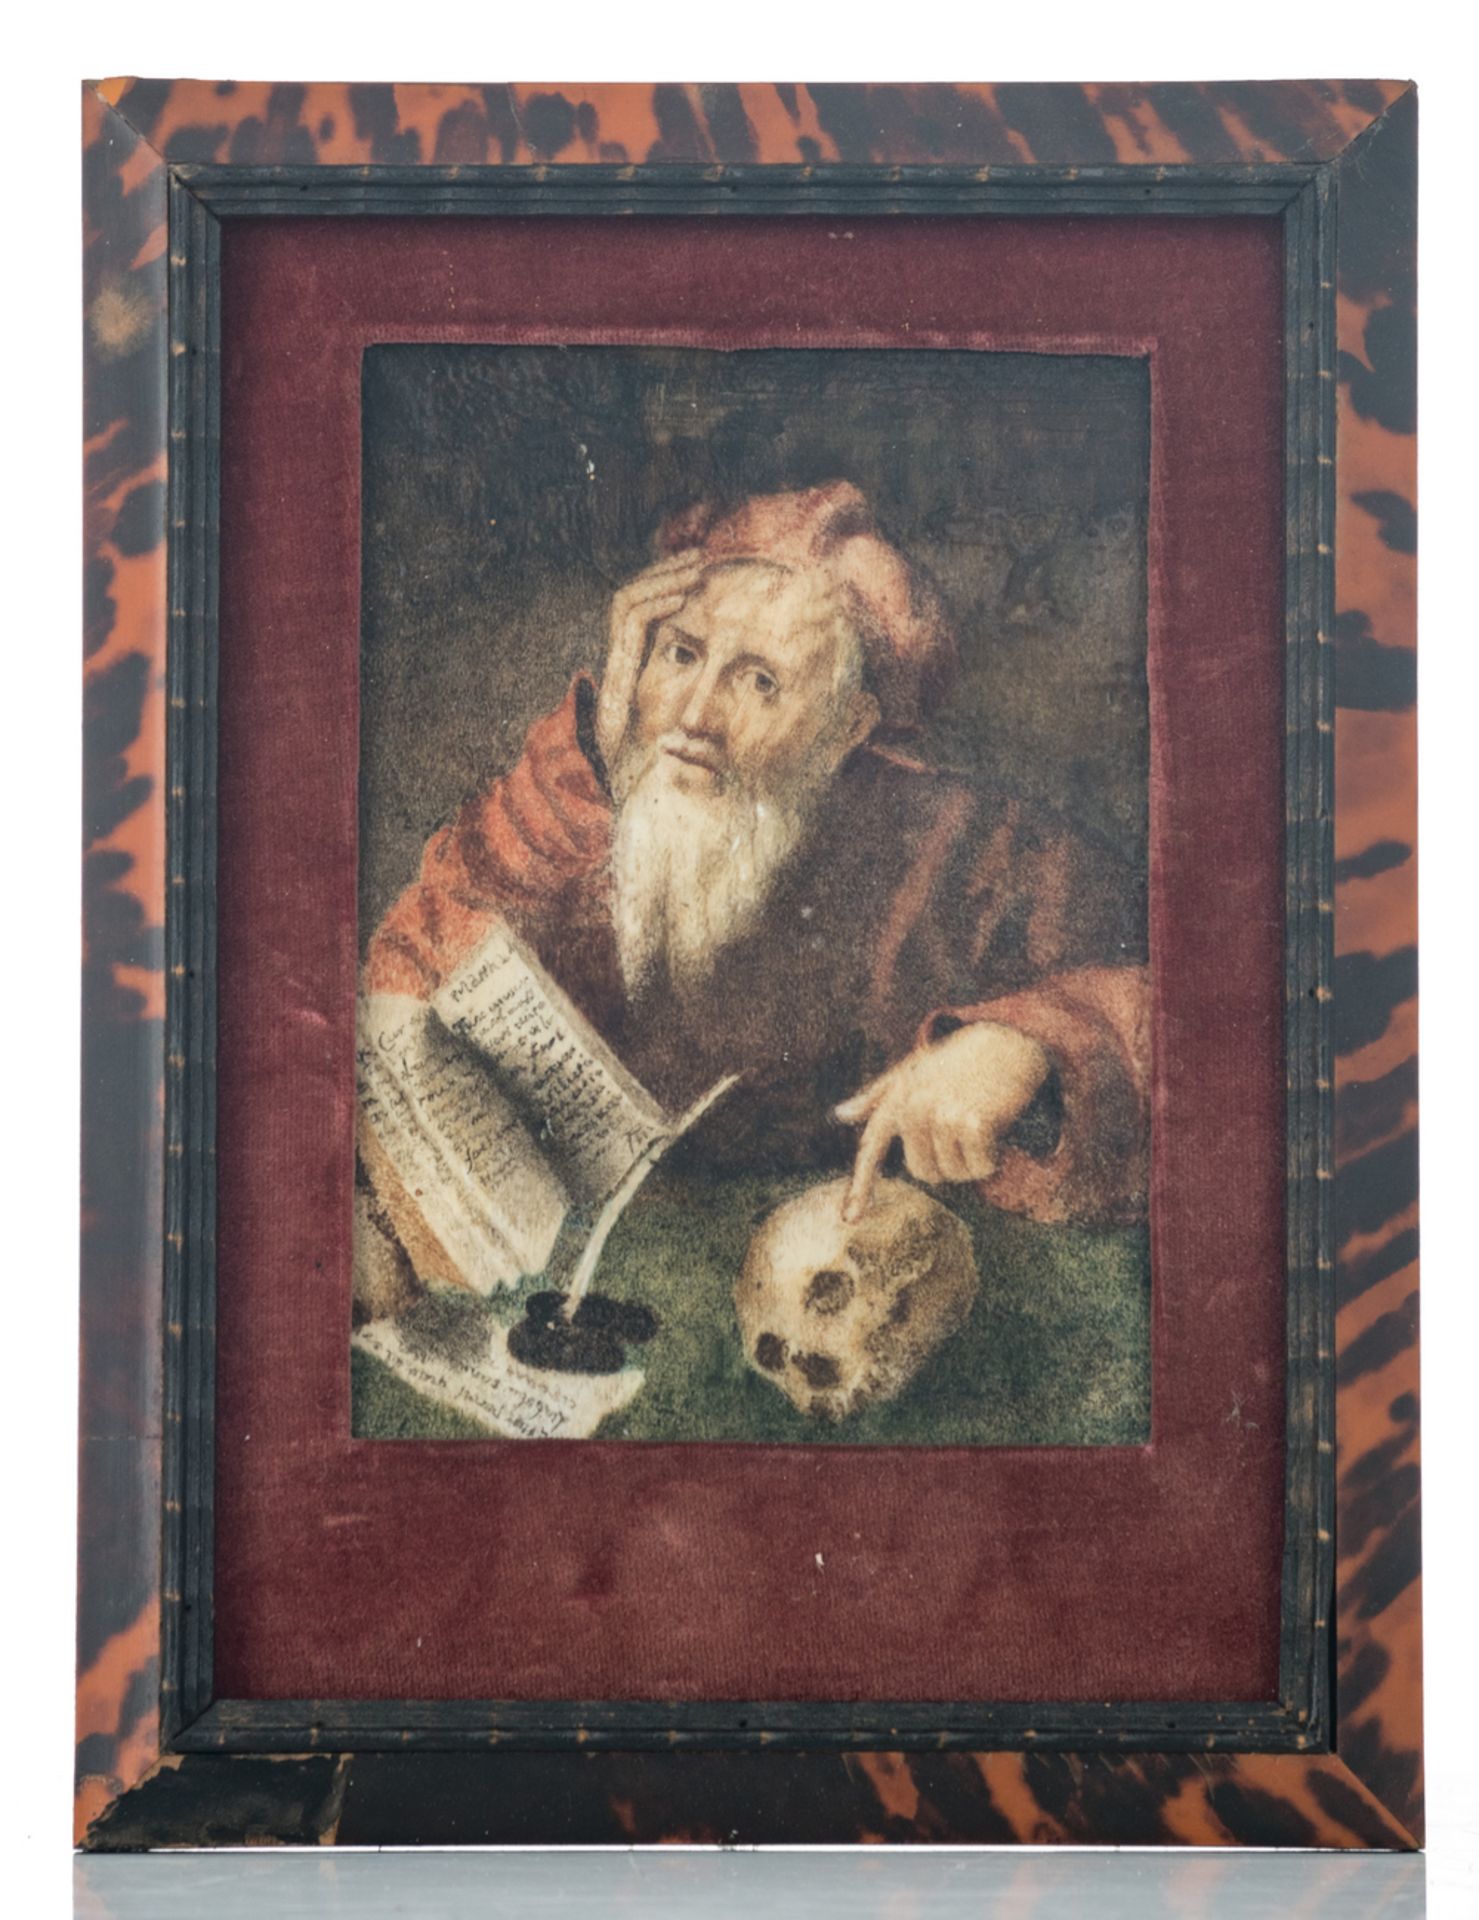 No visible signature, Saint Jerome in his study, miniature on ivory, 18thC, with a 19thC tortoise - Image 2 of 3